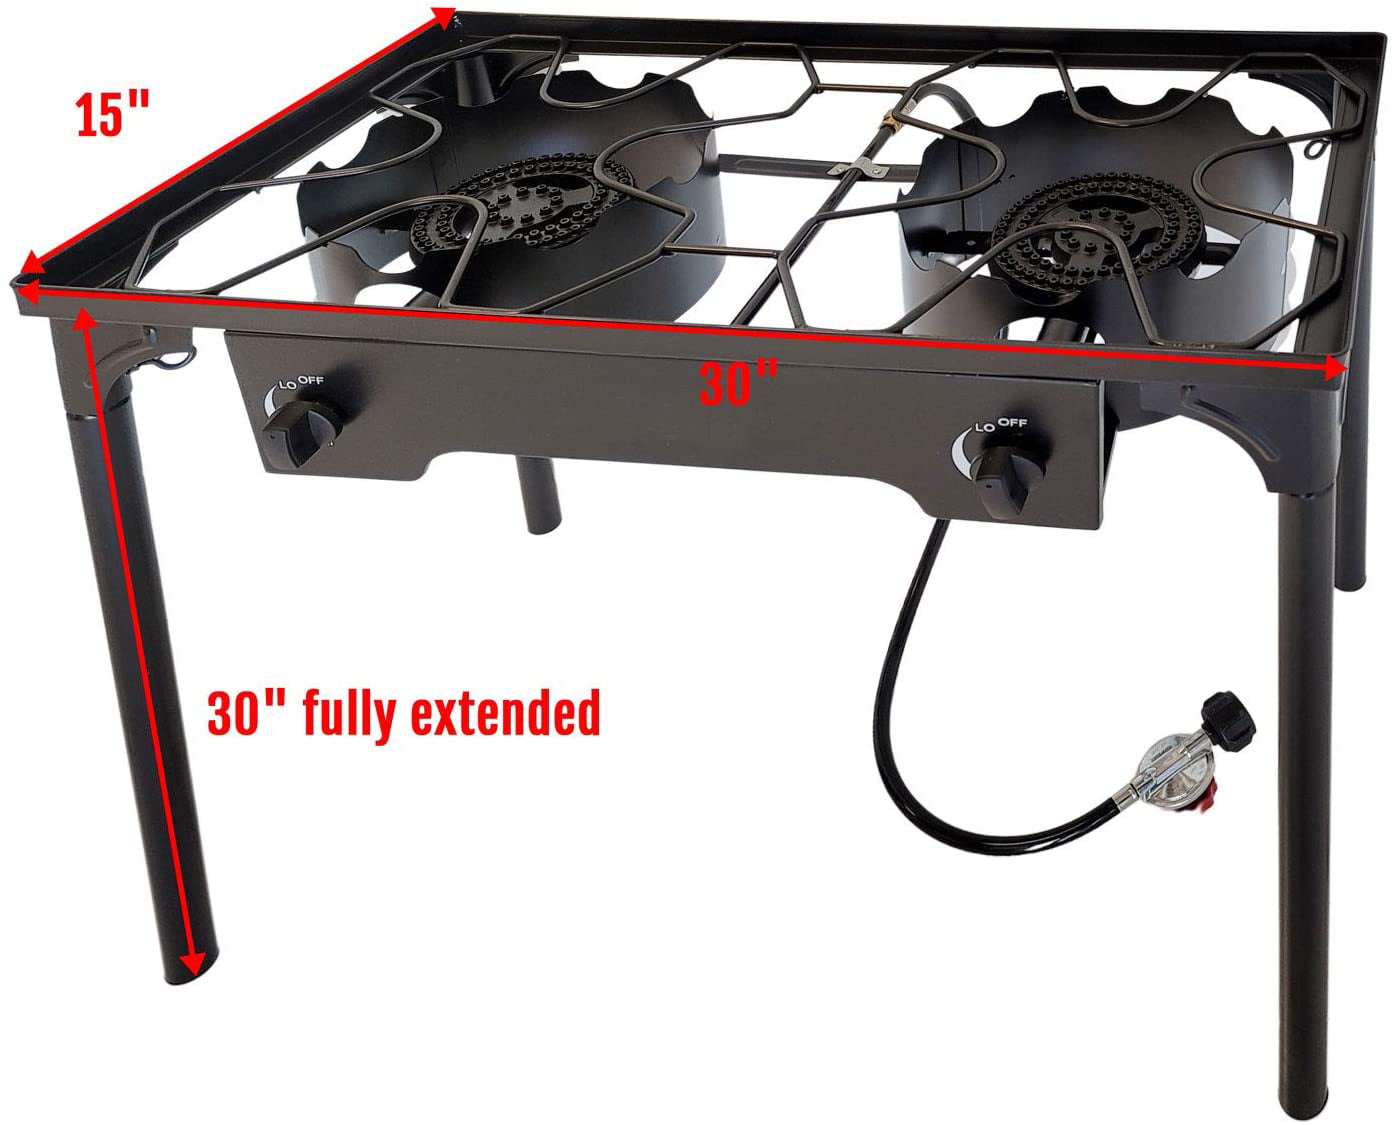 32 x 17 Large Folding Portable Two Burner Cast Iron 150,000 BTU Stove with Stainless Steel Griddle Plancha Comal Camping Tailgating Boating 